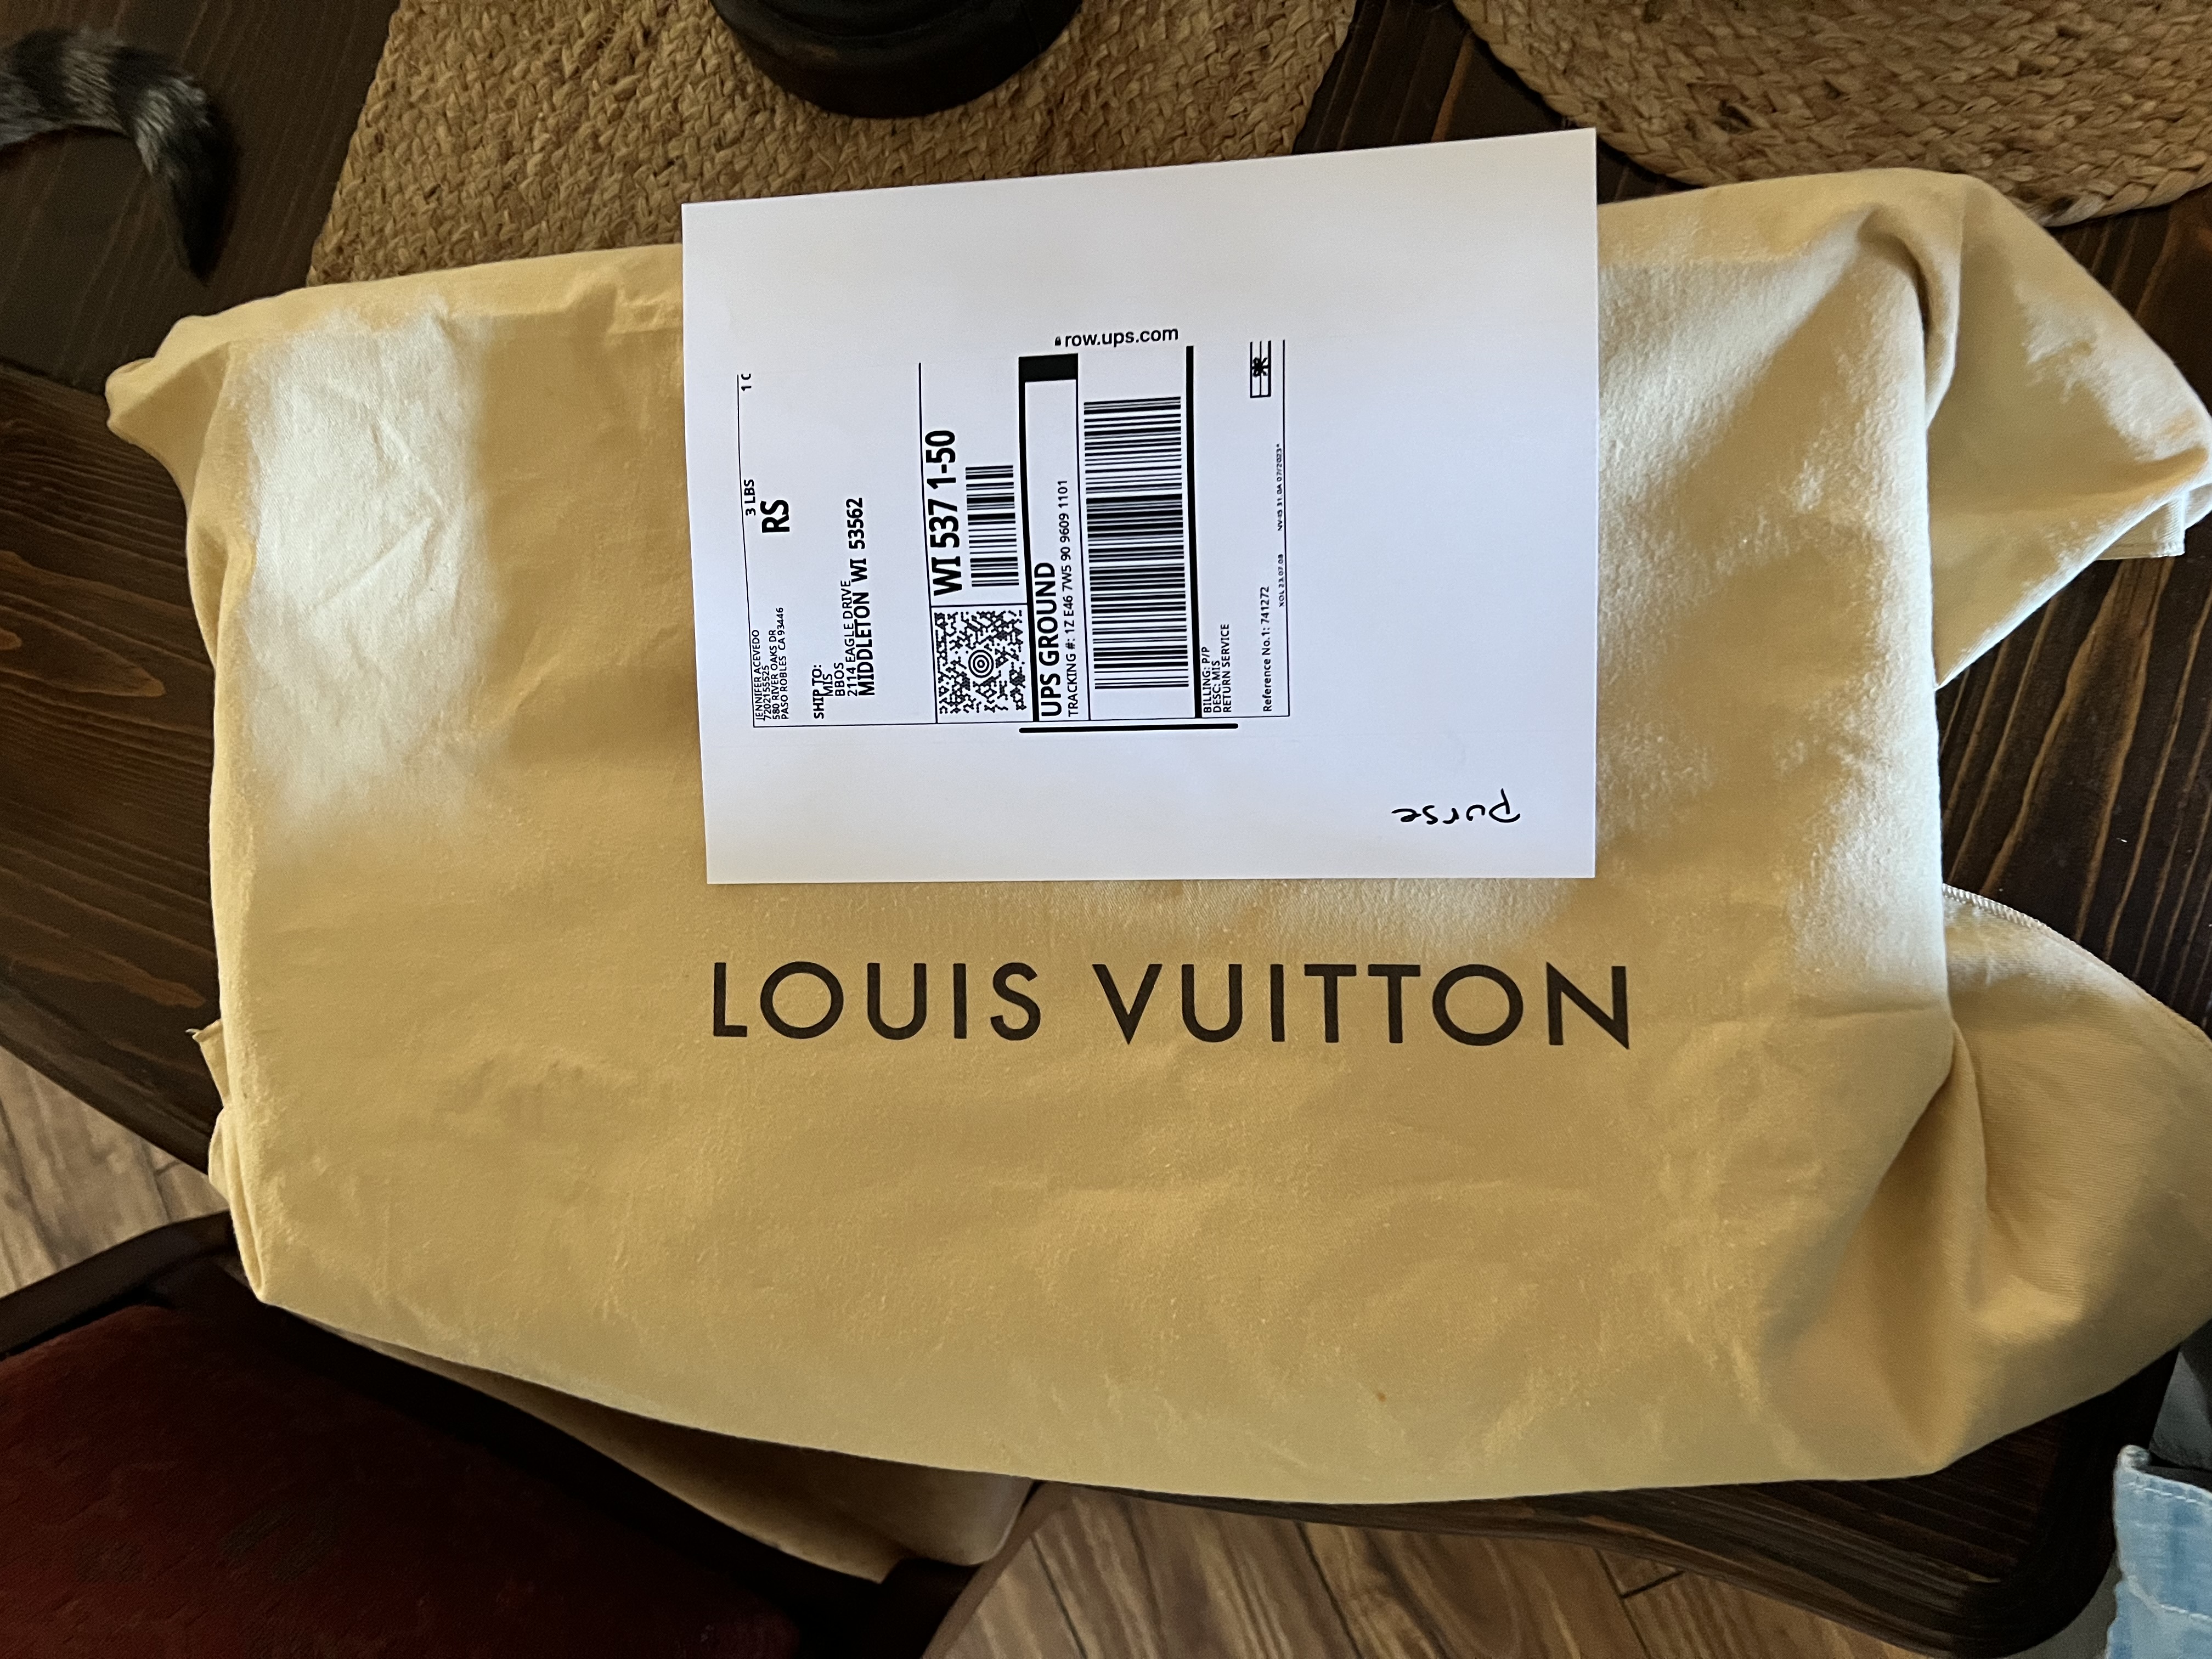 Louis Vuitton Stunning WALLET with dust bag - $302 - From Jennifer